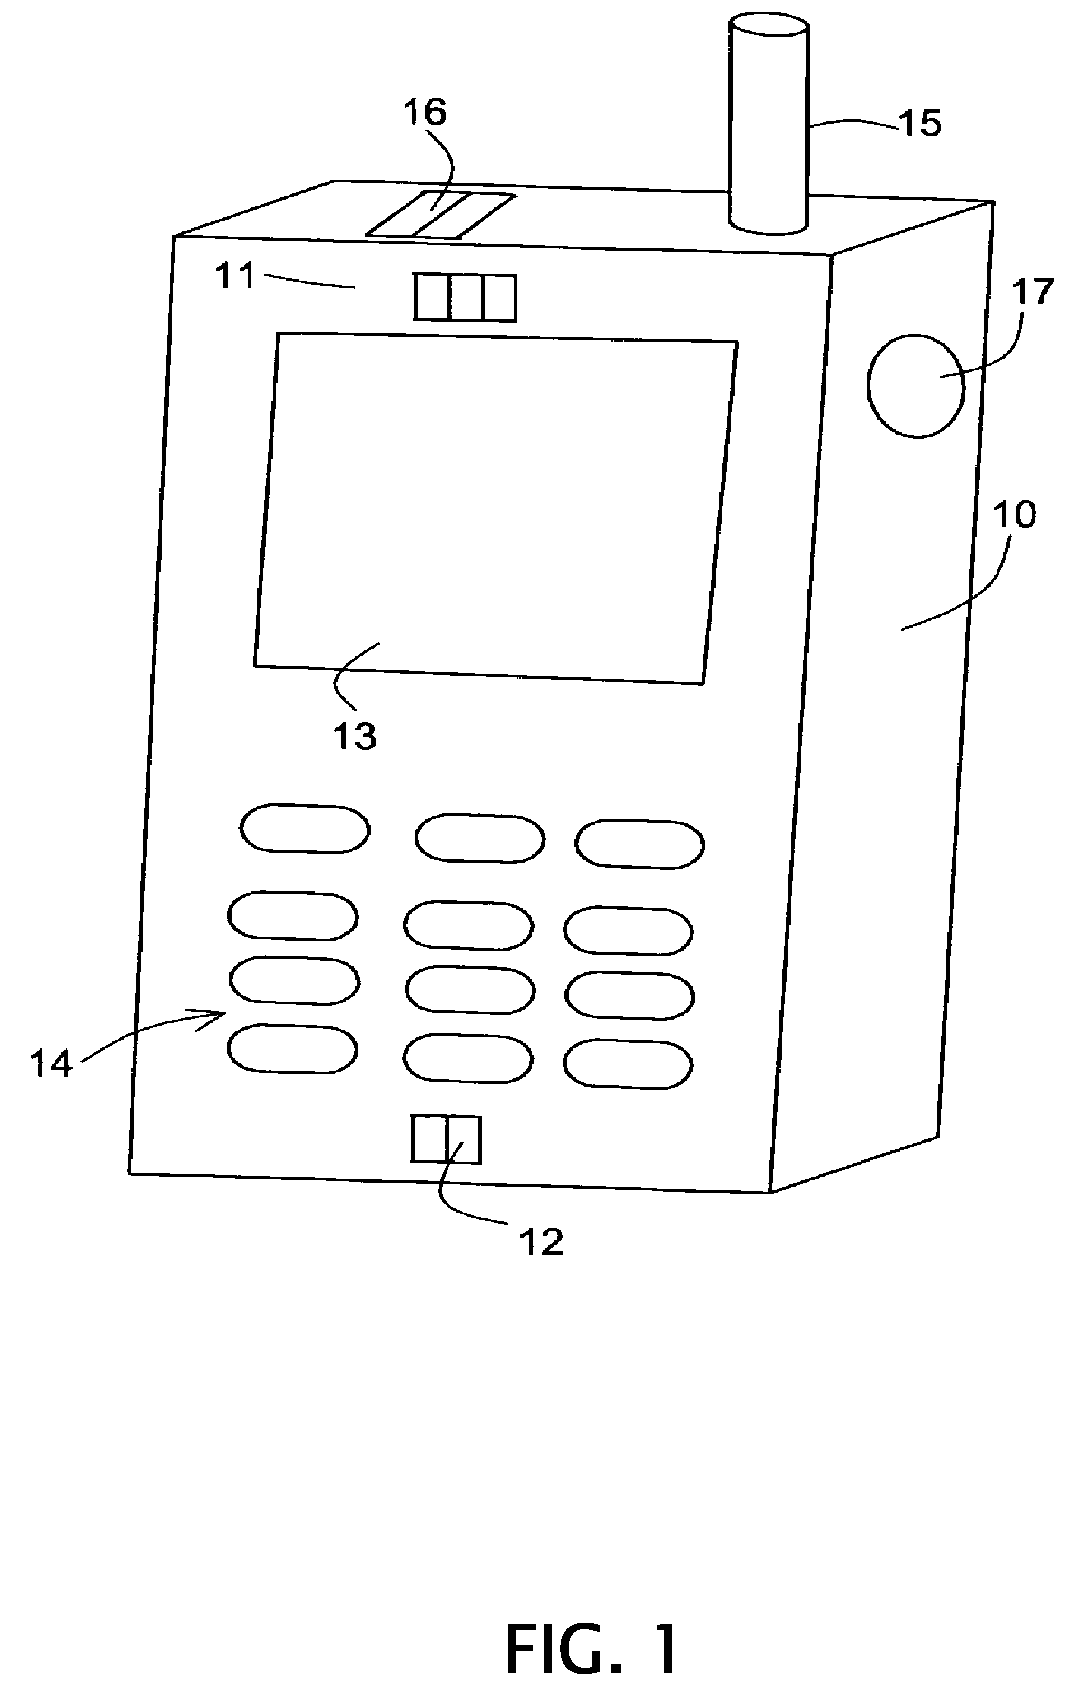 Environmental noise reduction and cancellation for a communication device including for a wireless and cellular telephone